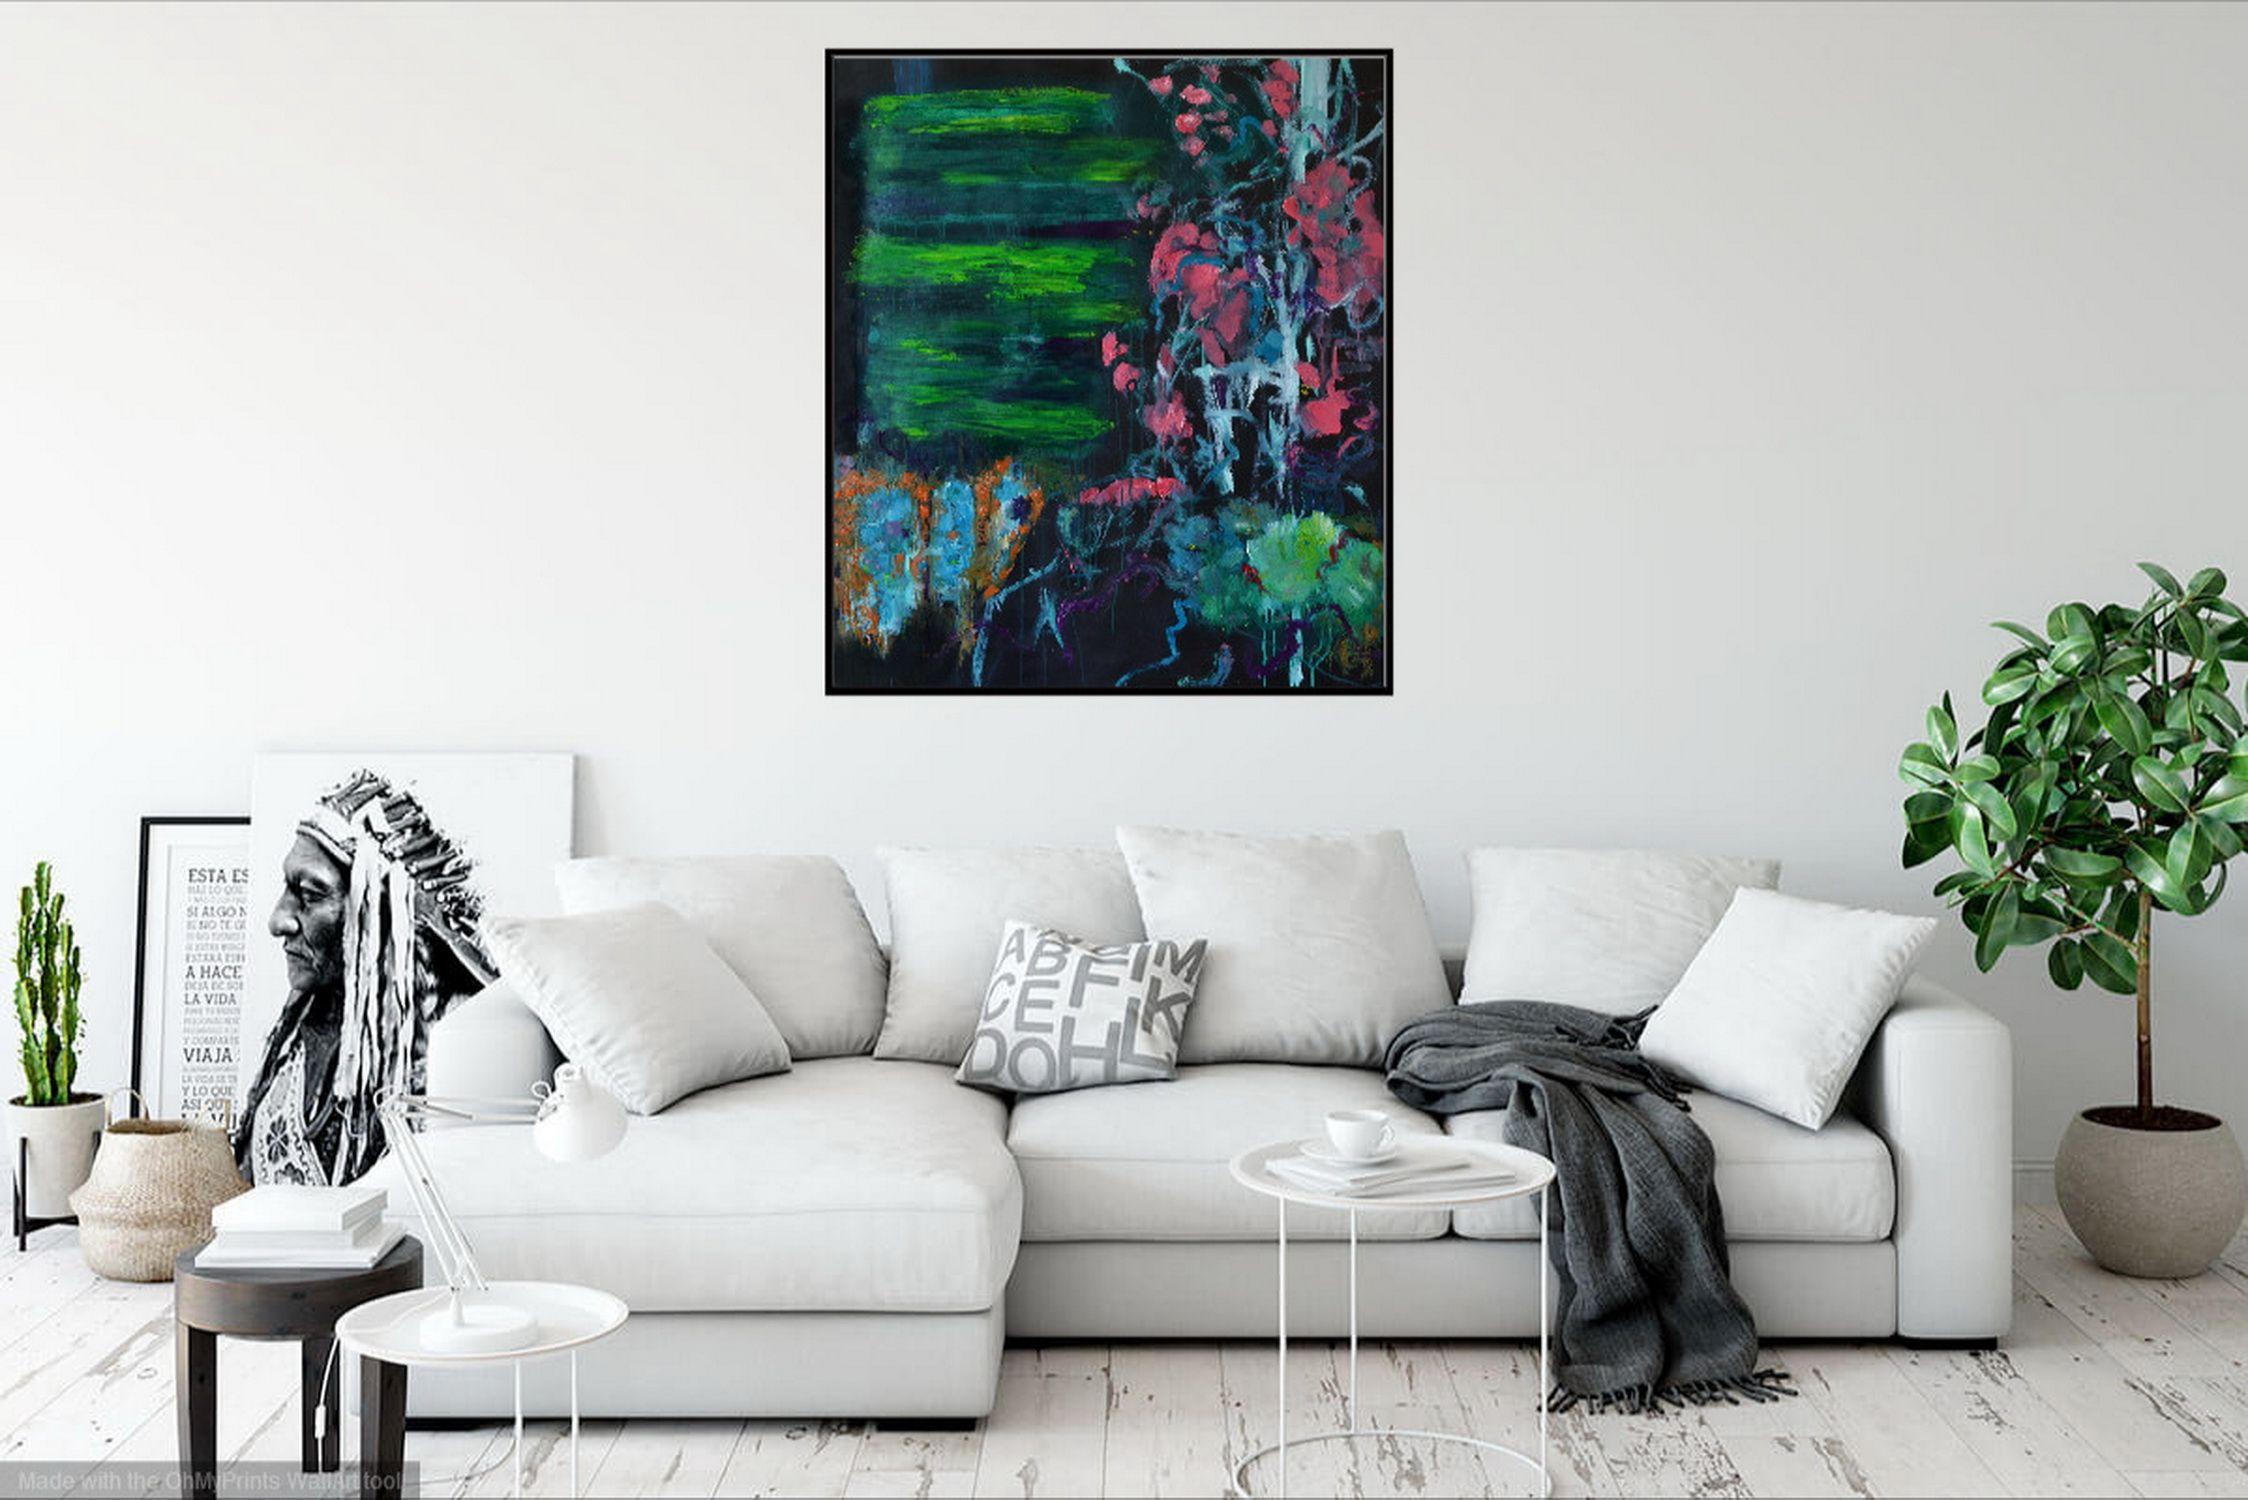 Tending my Garden, Painting, Oil on Paper - Black Abstract Painting by Karin Goeppert